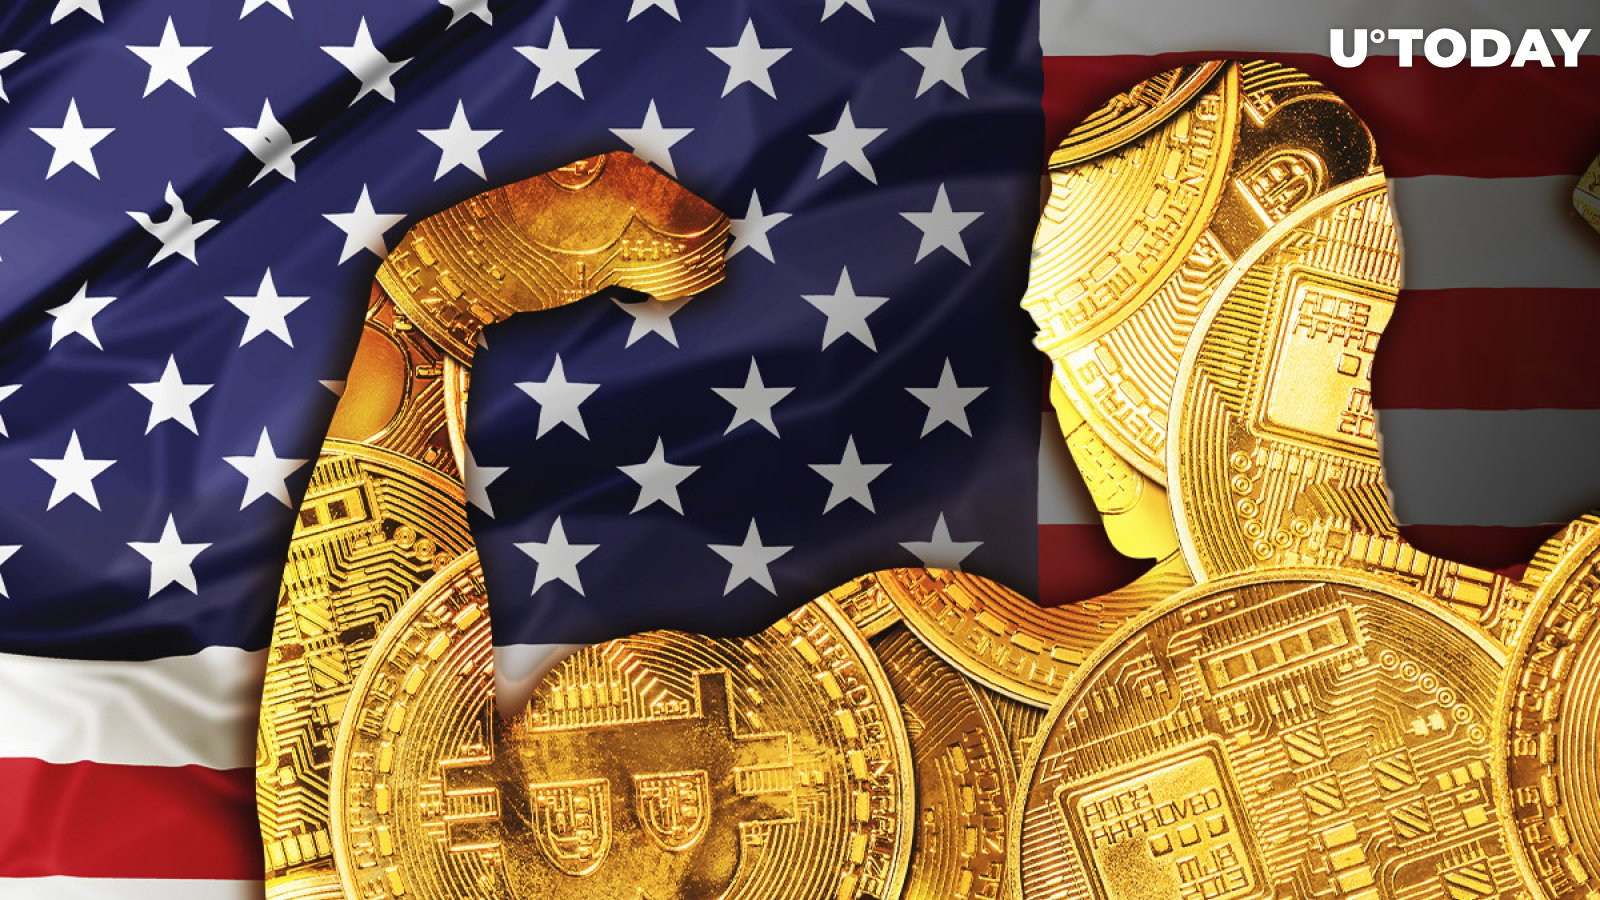 Cryptocurrencies Now Worth More Than American Banking System